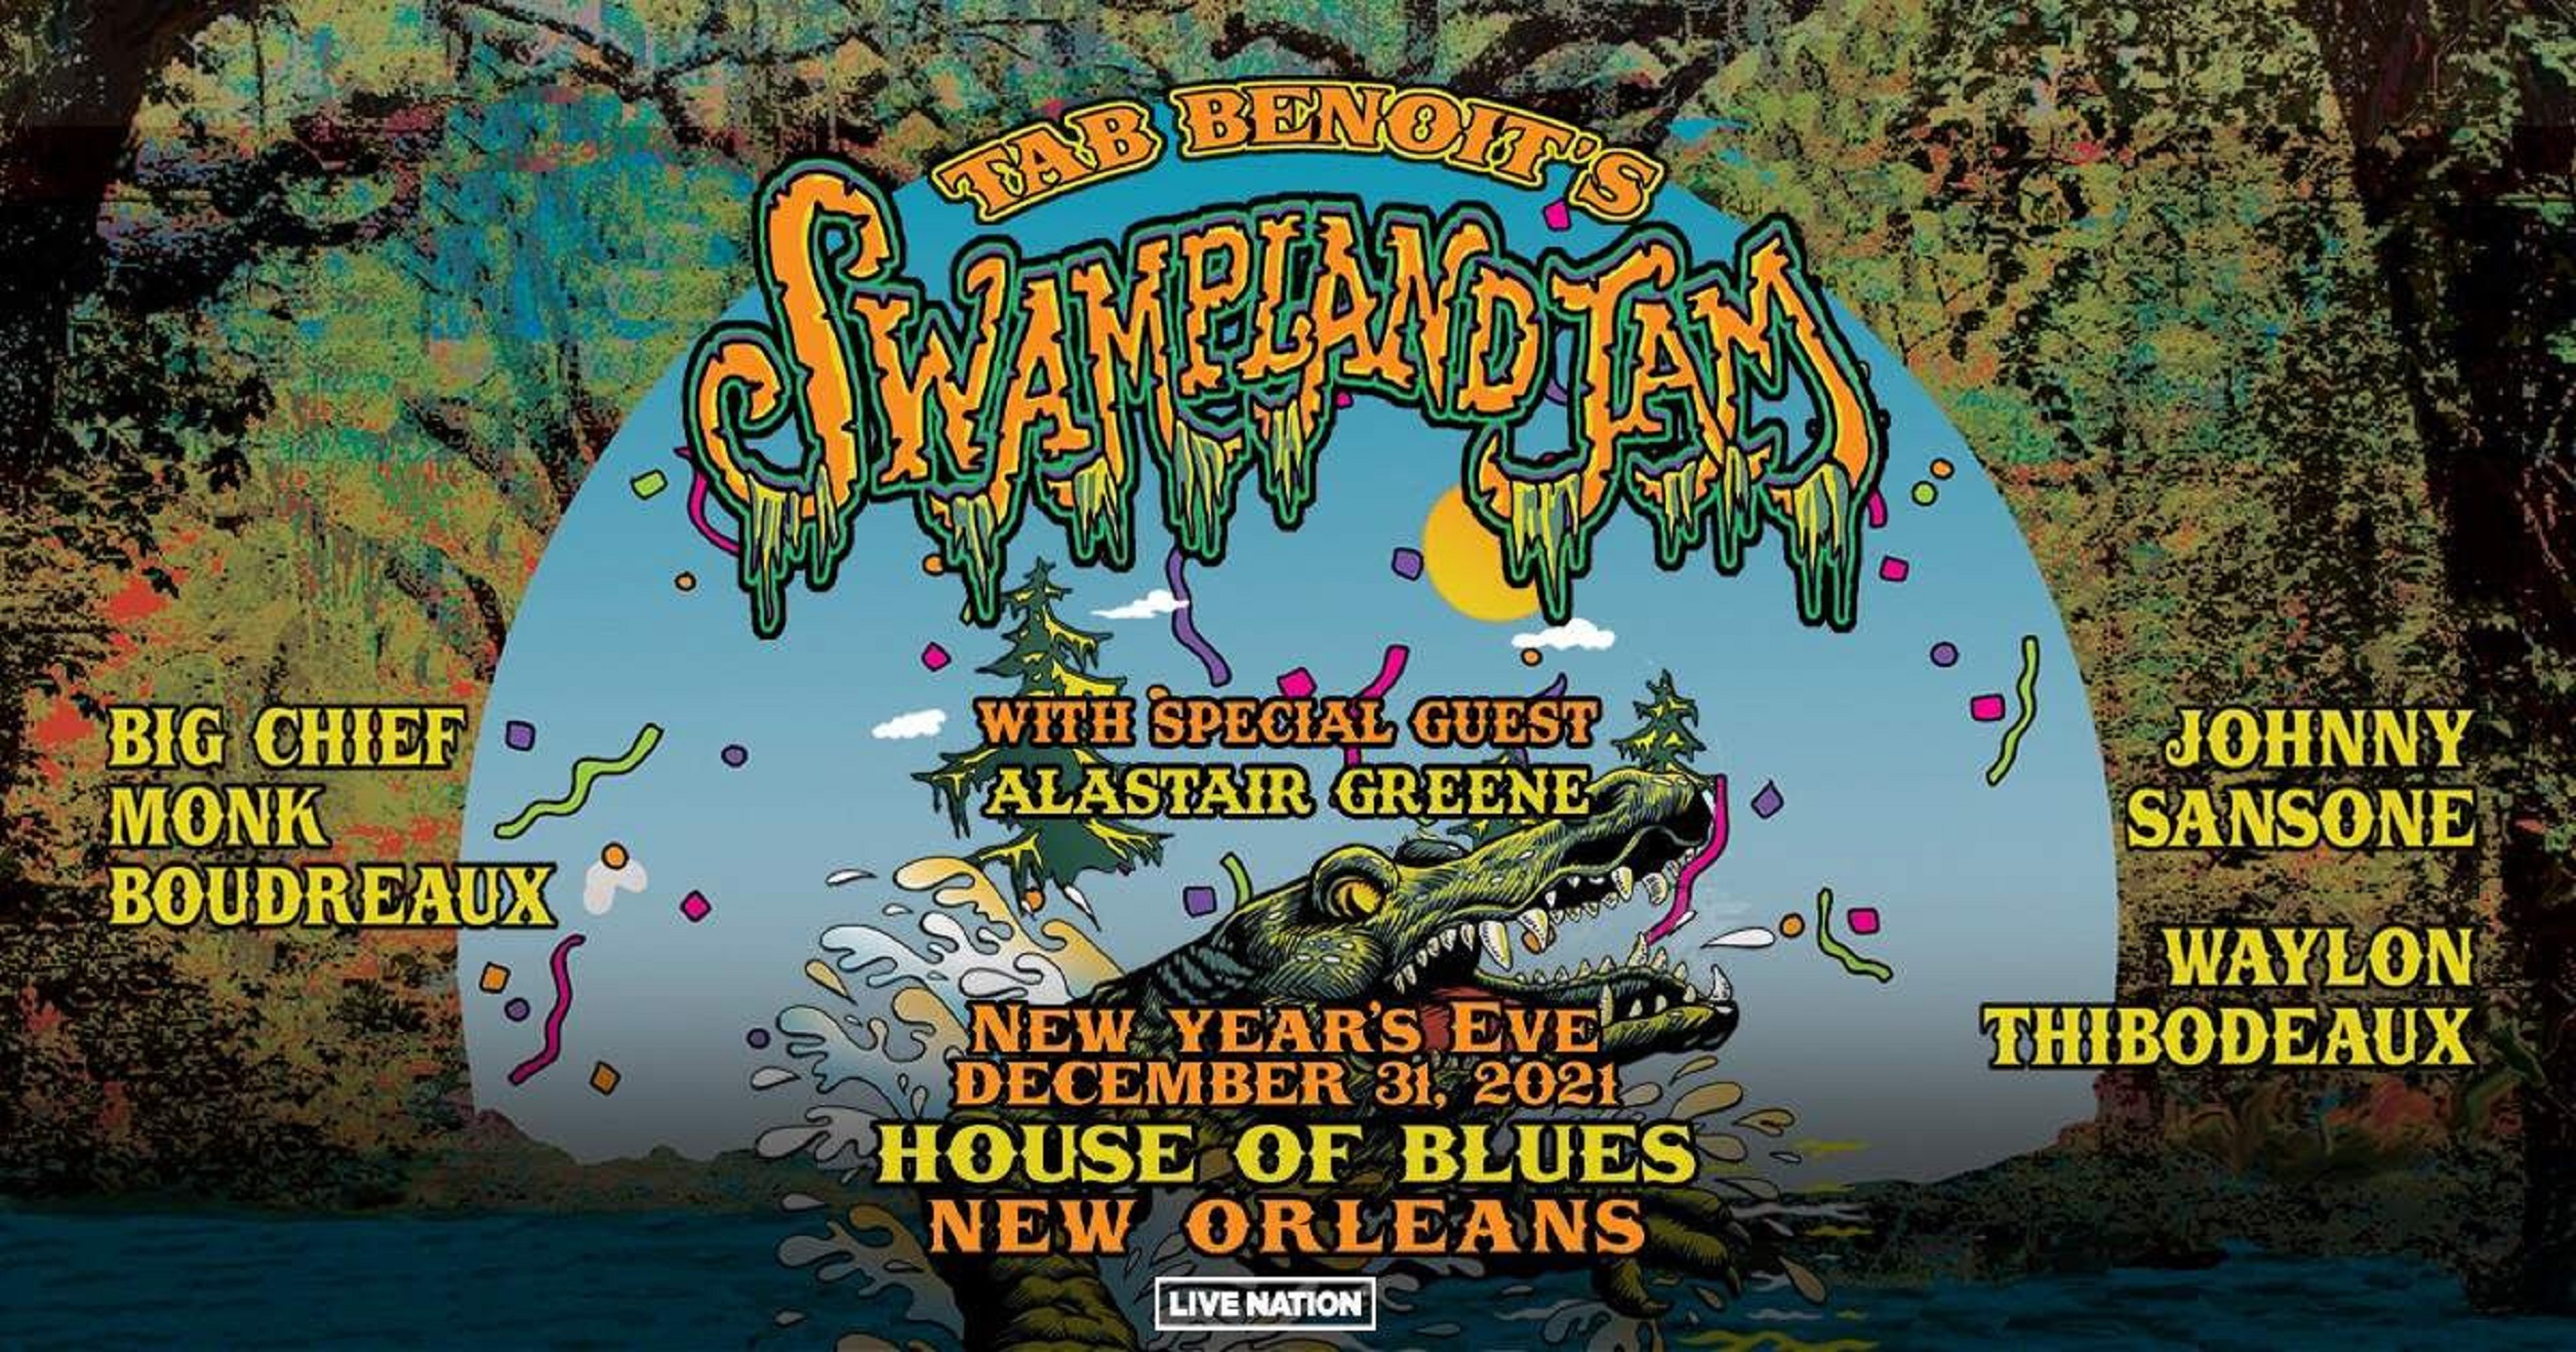 Ring In 2022 With Tab Benoit's Swampland Jam at House of Blues New Orleans